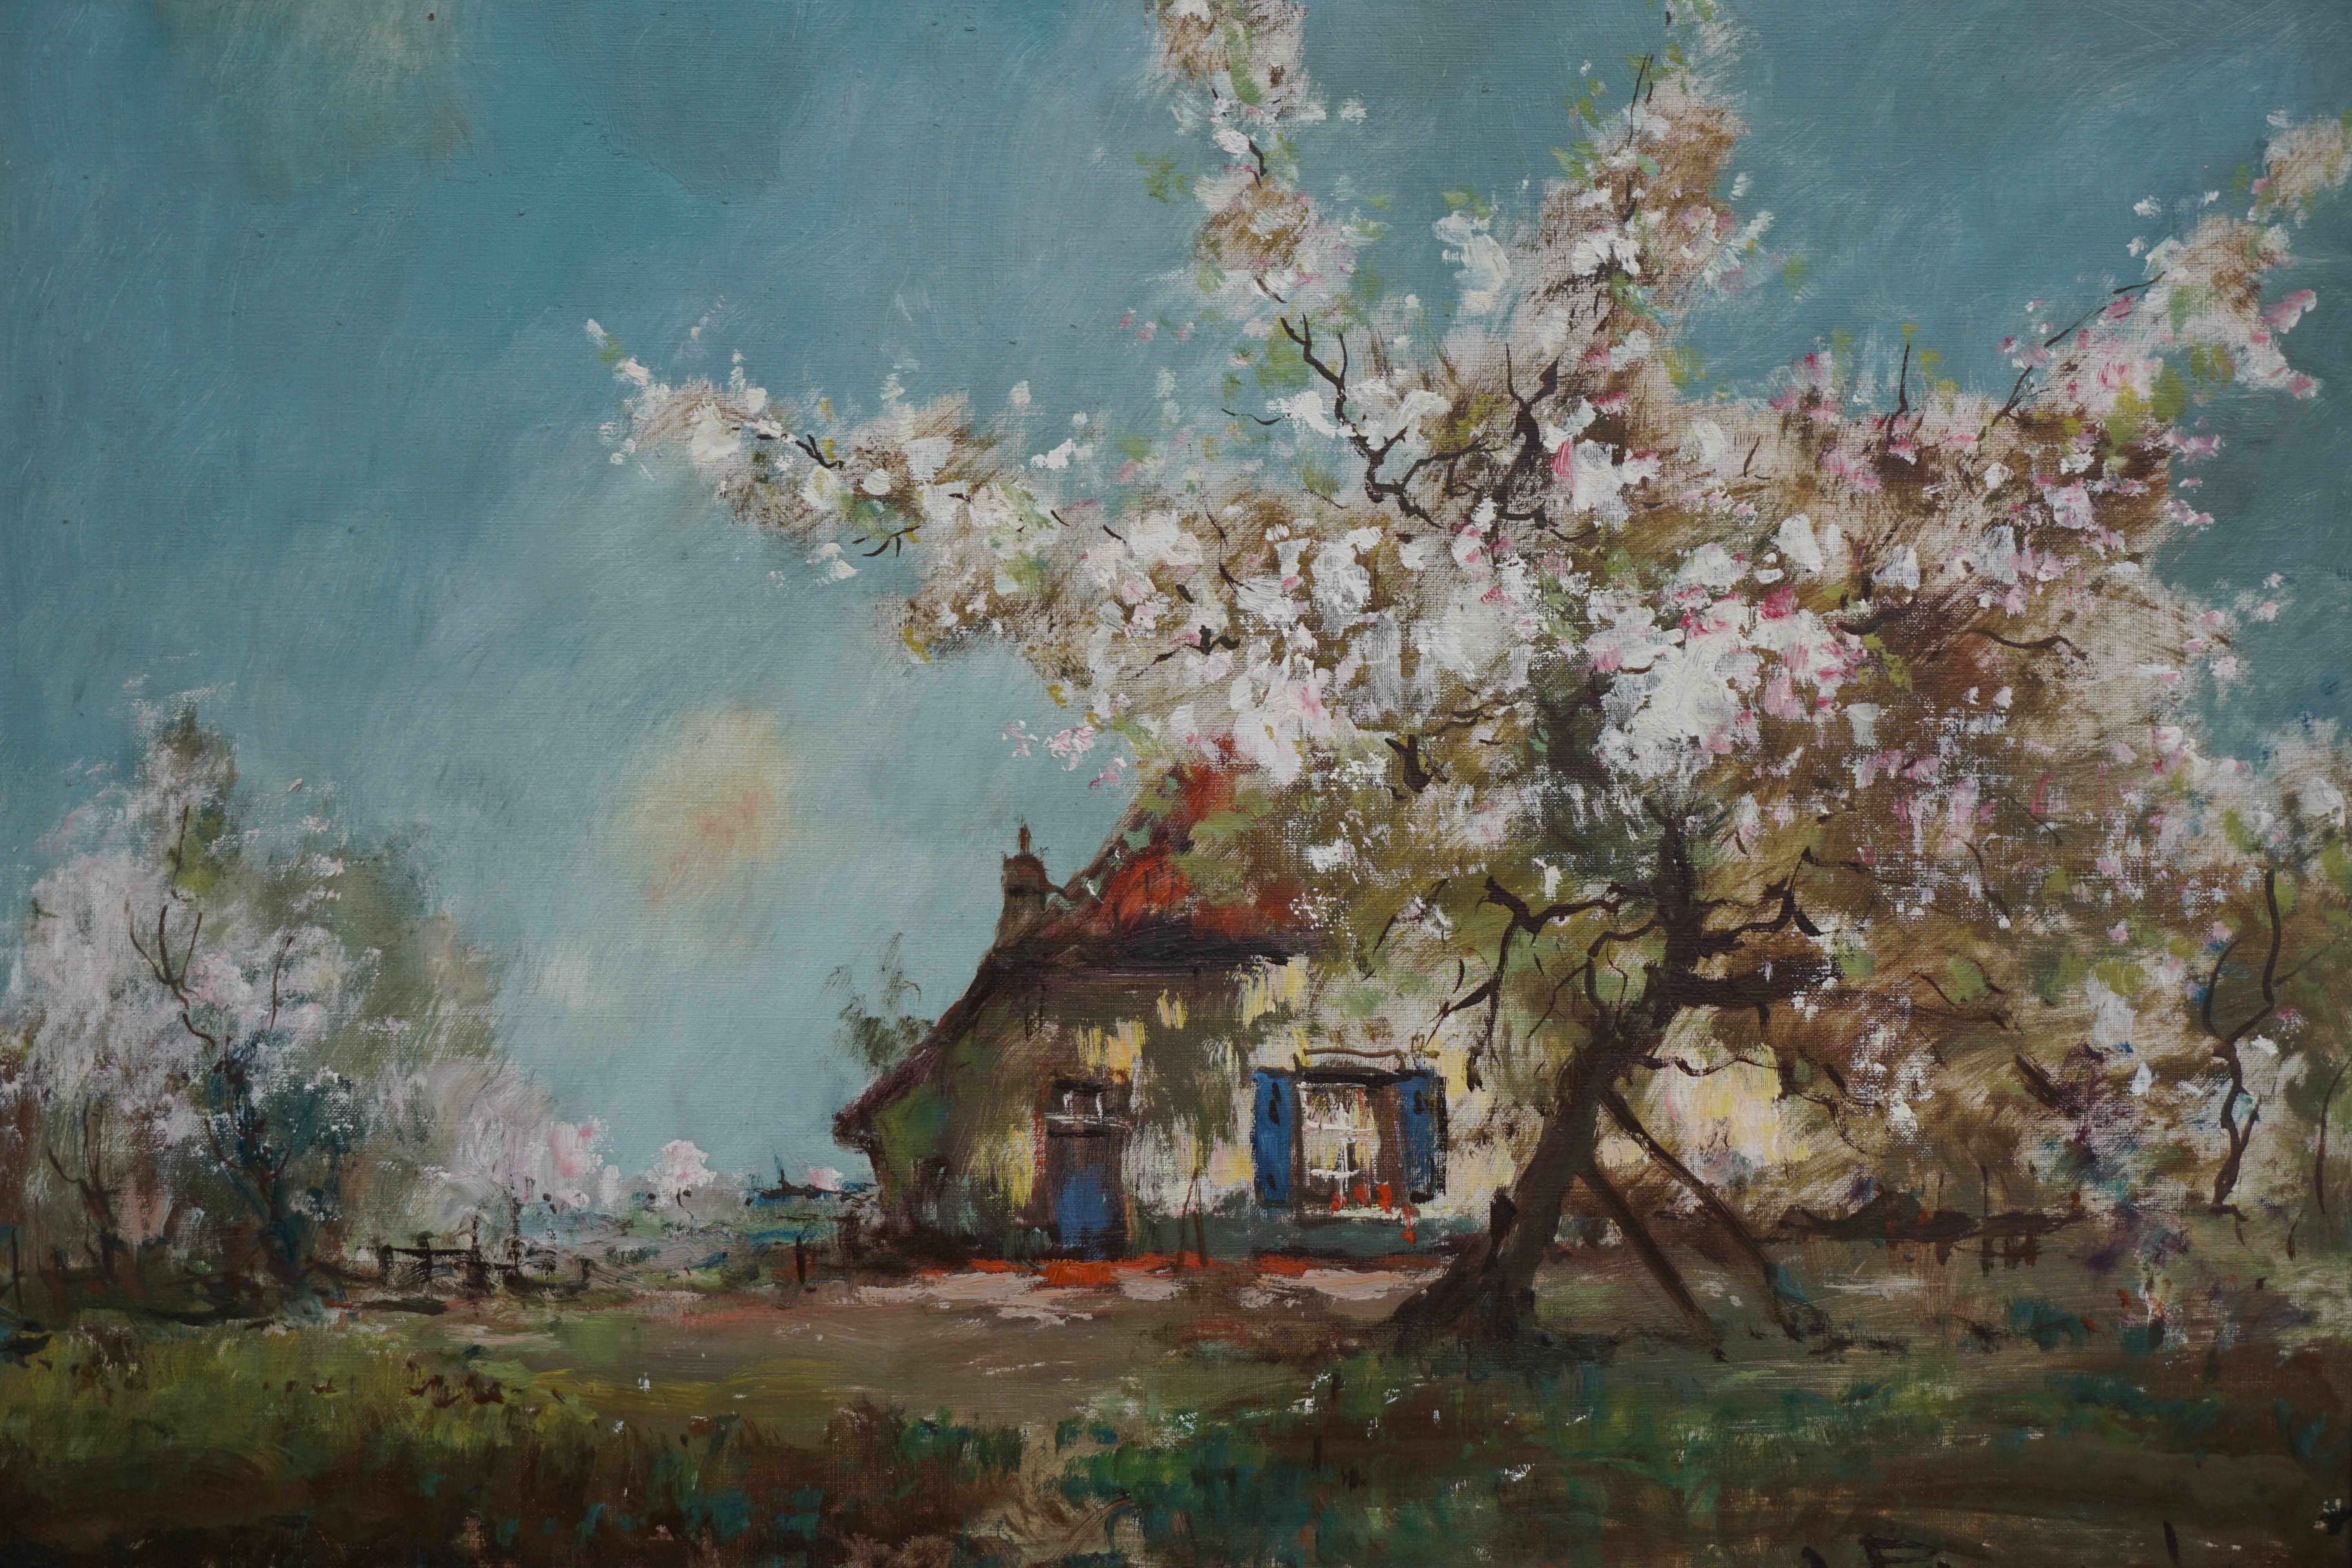 Painting farm on a flowering apple tree by Henri Pauwels (1903-1983) Belgium.

Artist: Henri Joseph Pauwels (Haasdonk 1903 - 1983 Beveren-Waas)
Technique: Oil on canvas
State: Good condition
Signature: Signed by the Artist